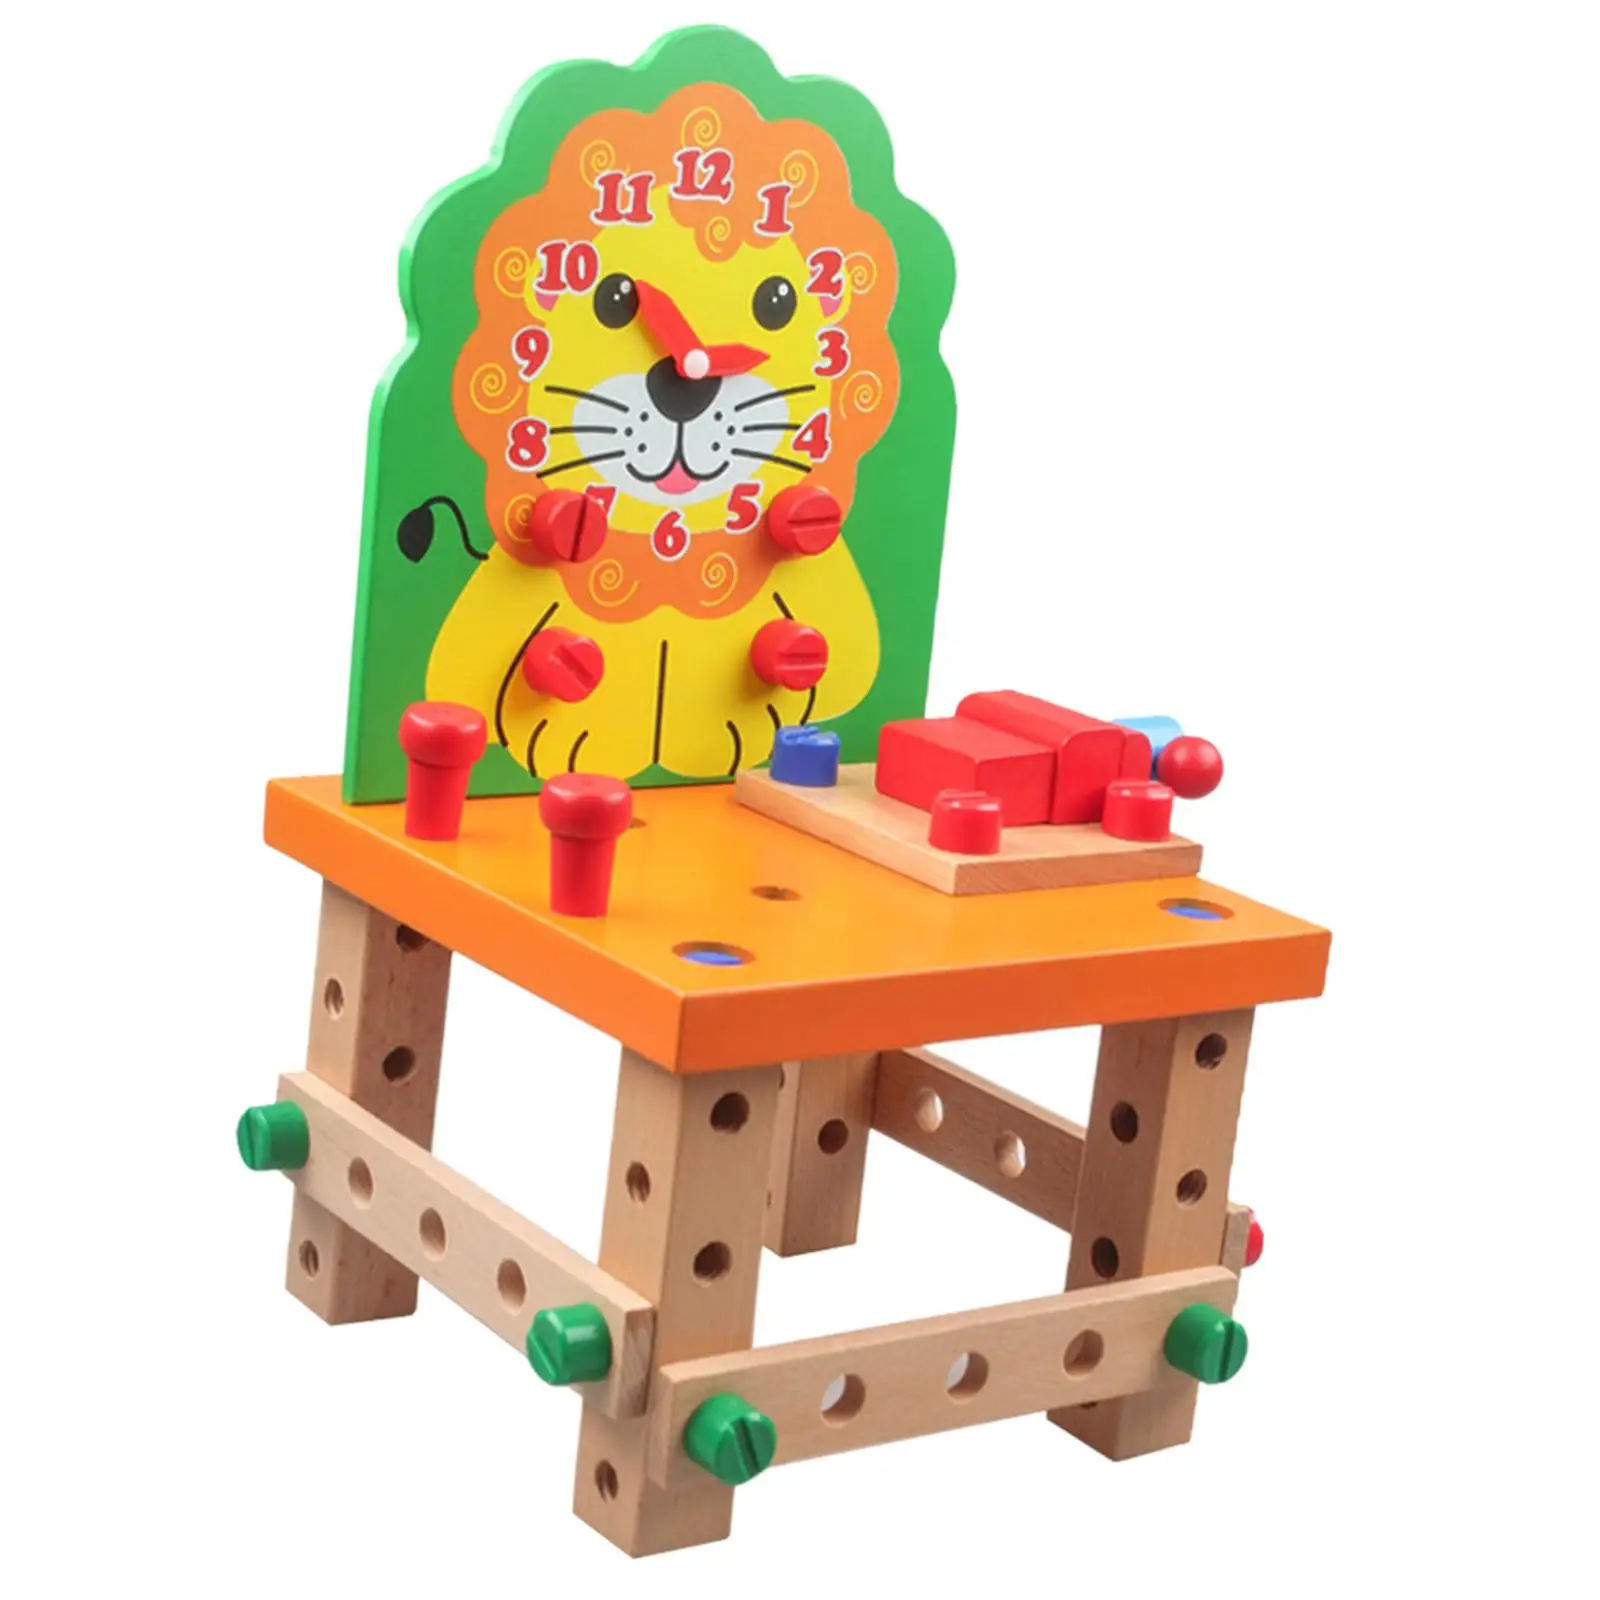 Kids Wooden Project Woodworking Kit Educational Building Toy Montessori Toys Wooden Assembling Chair for Girls Boys Gifts